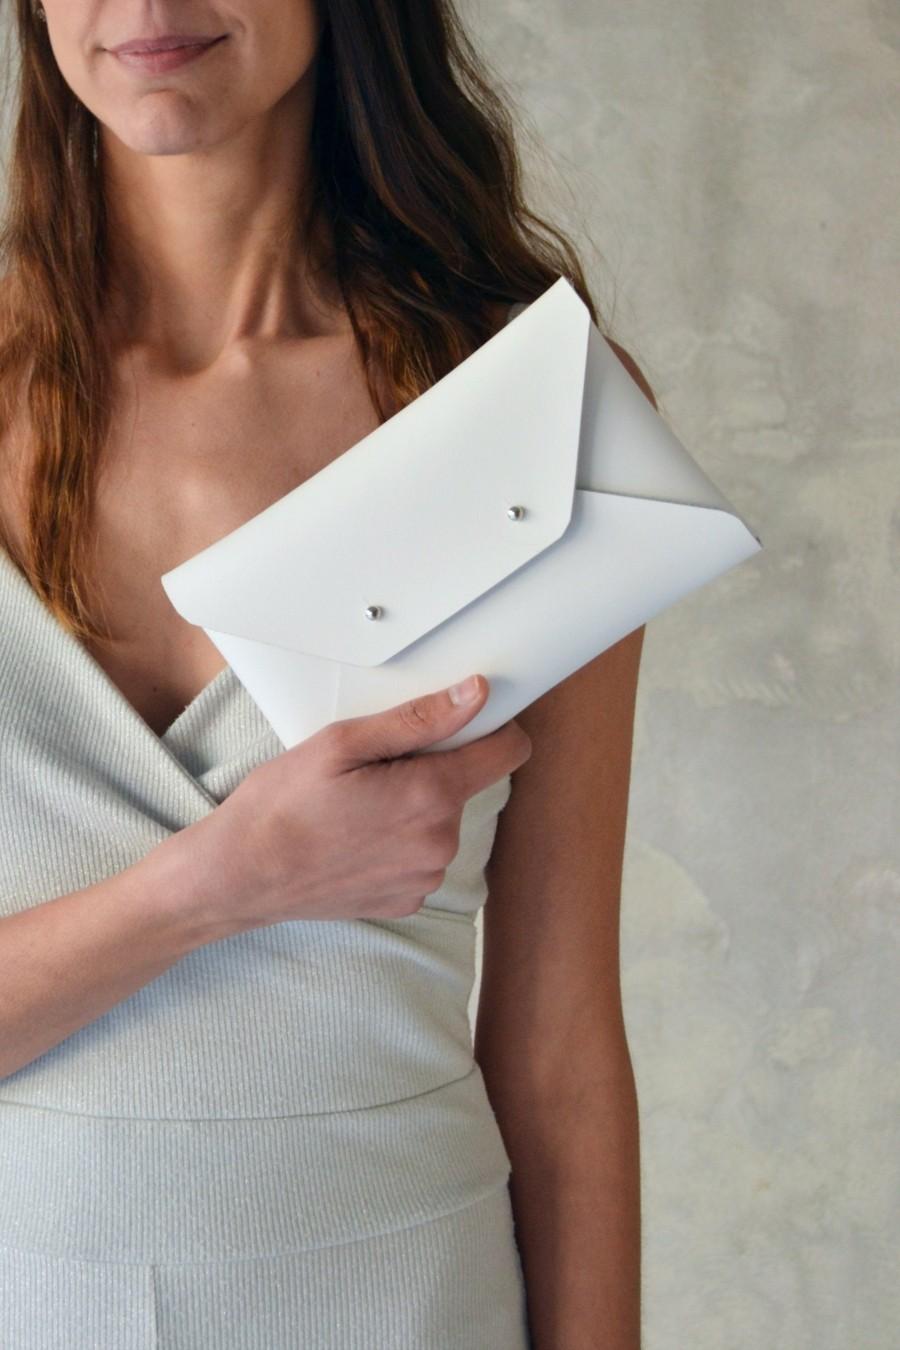 Wedding - White leather clutch bag / Leather bag available with wrist strap / Genuine leather / Wedding clutch / Bridesmaids clutch / SMALL SIZE